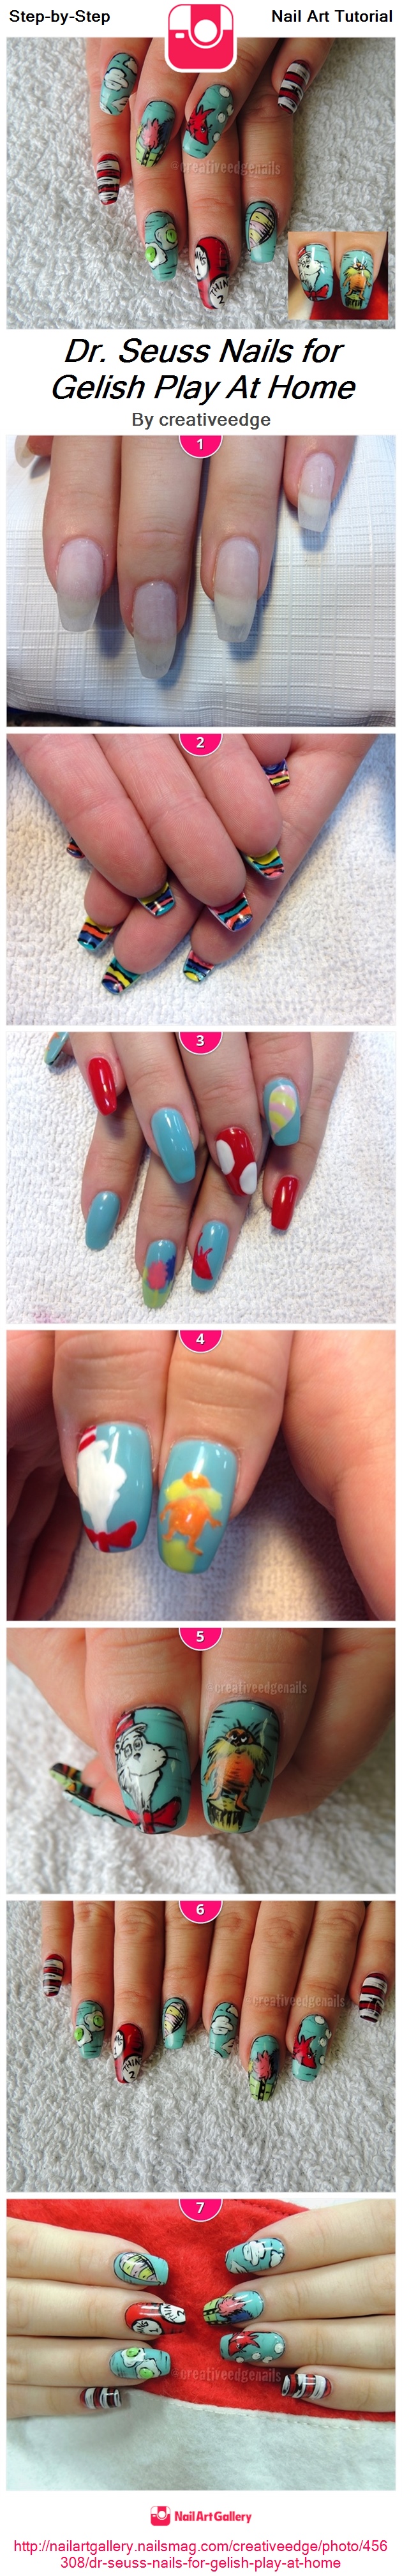 Dr. Seuss Nails for Gelish Play At Home - Nail Art Gallery